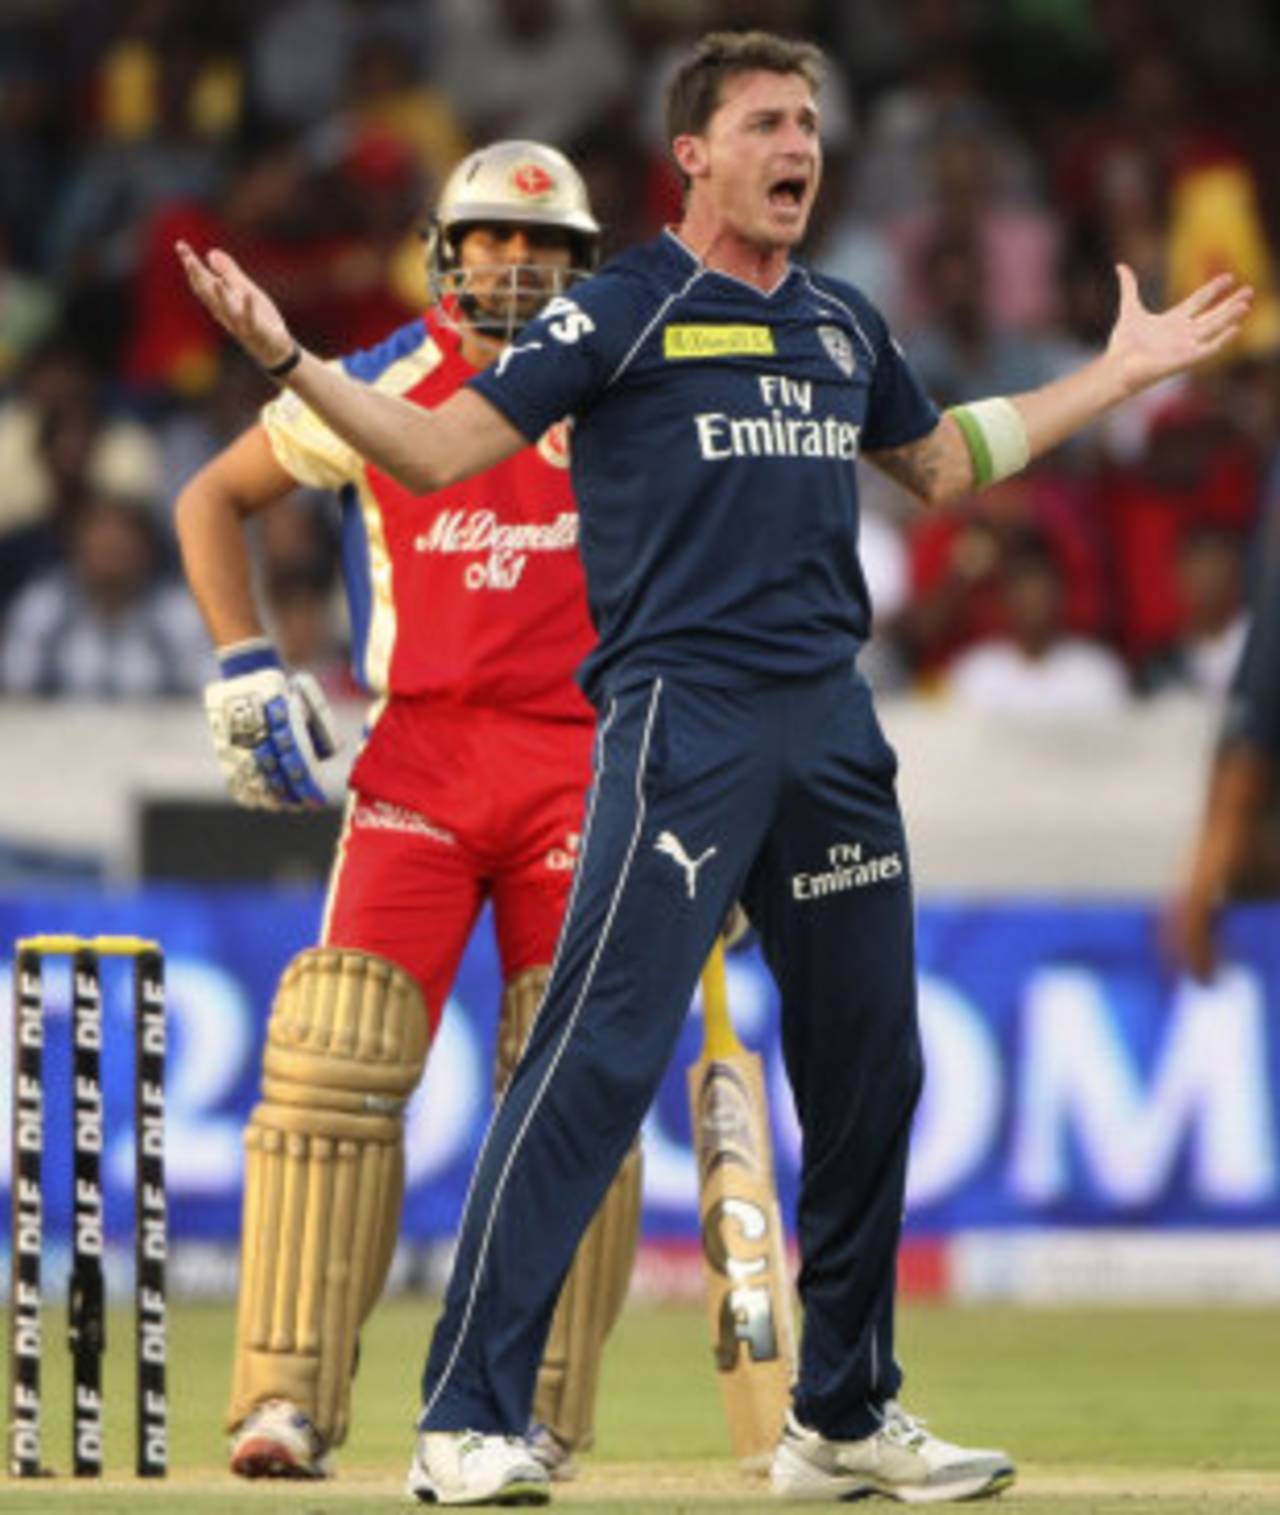 Dale Steyn was in red-hot form, Deccan Chargers v Royal Challengers Bangalore, IPL, Hyderabad, May 20, 2012